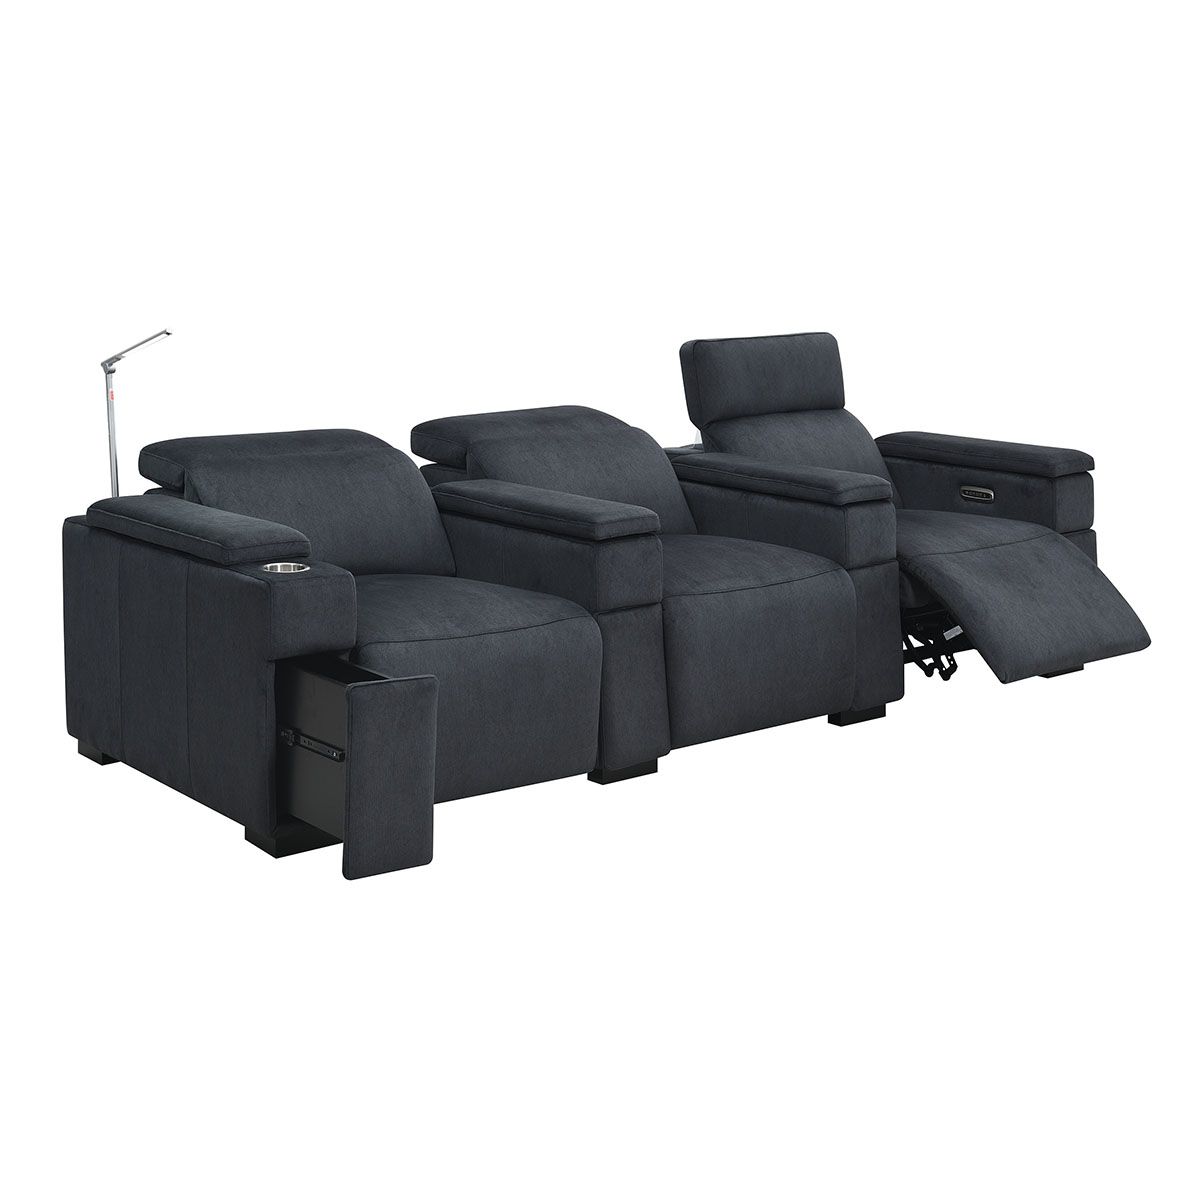 RowOne Calveri - Charcoal Patterned Polyester Microfiber Fabric - 3 Chair Row - angled front view - opened